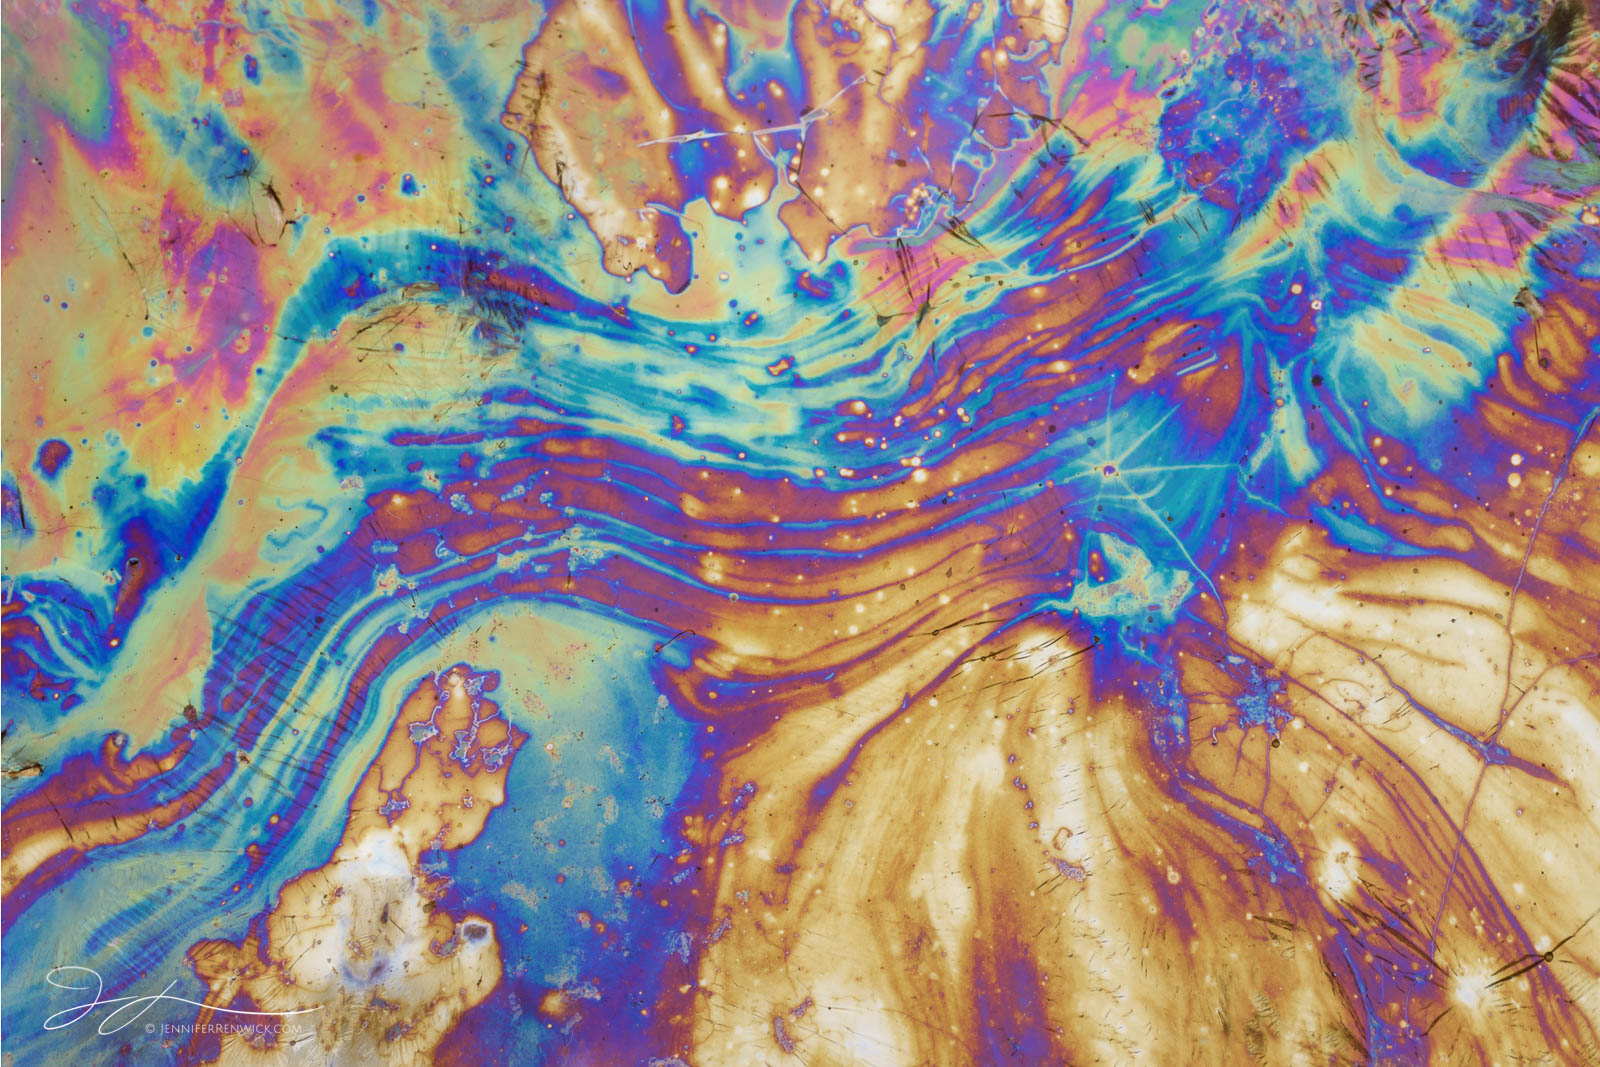 An explosion of highly colored natural oils creates a tie-dye pattern.